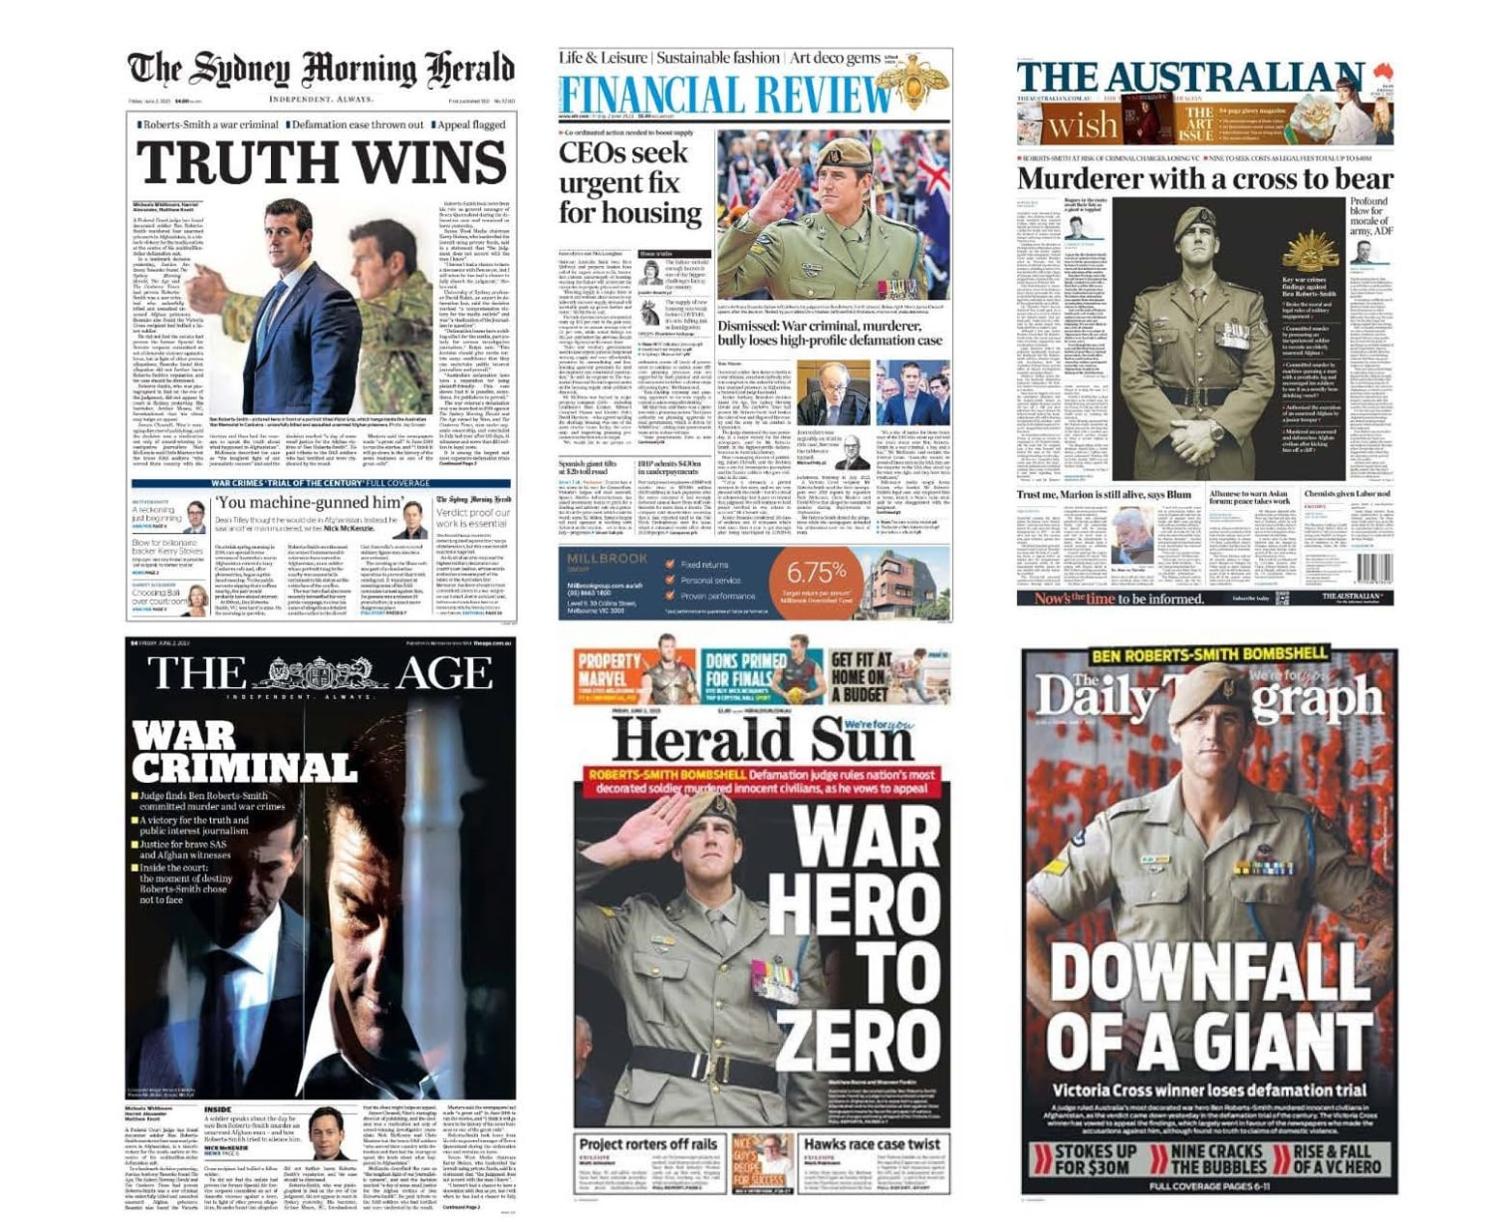 Newspaper front pages in Australia on 2 June reporting the outcome of the Ben Roberts-Smith defamation trial